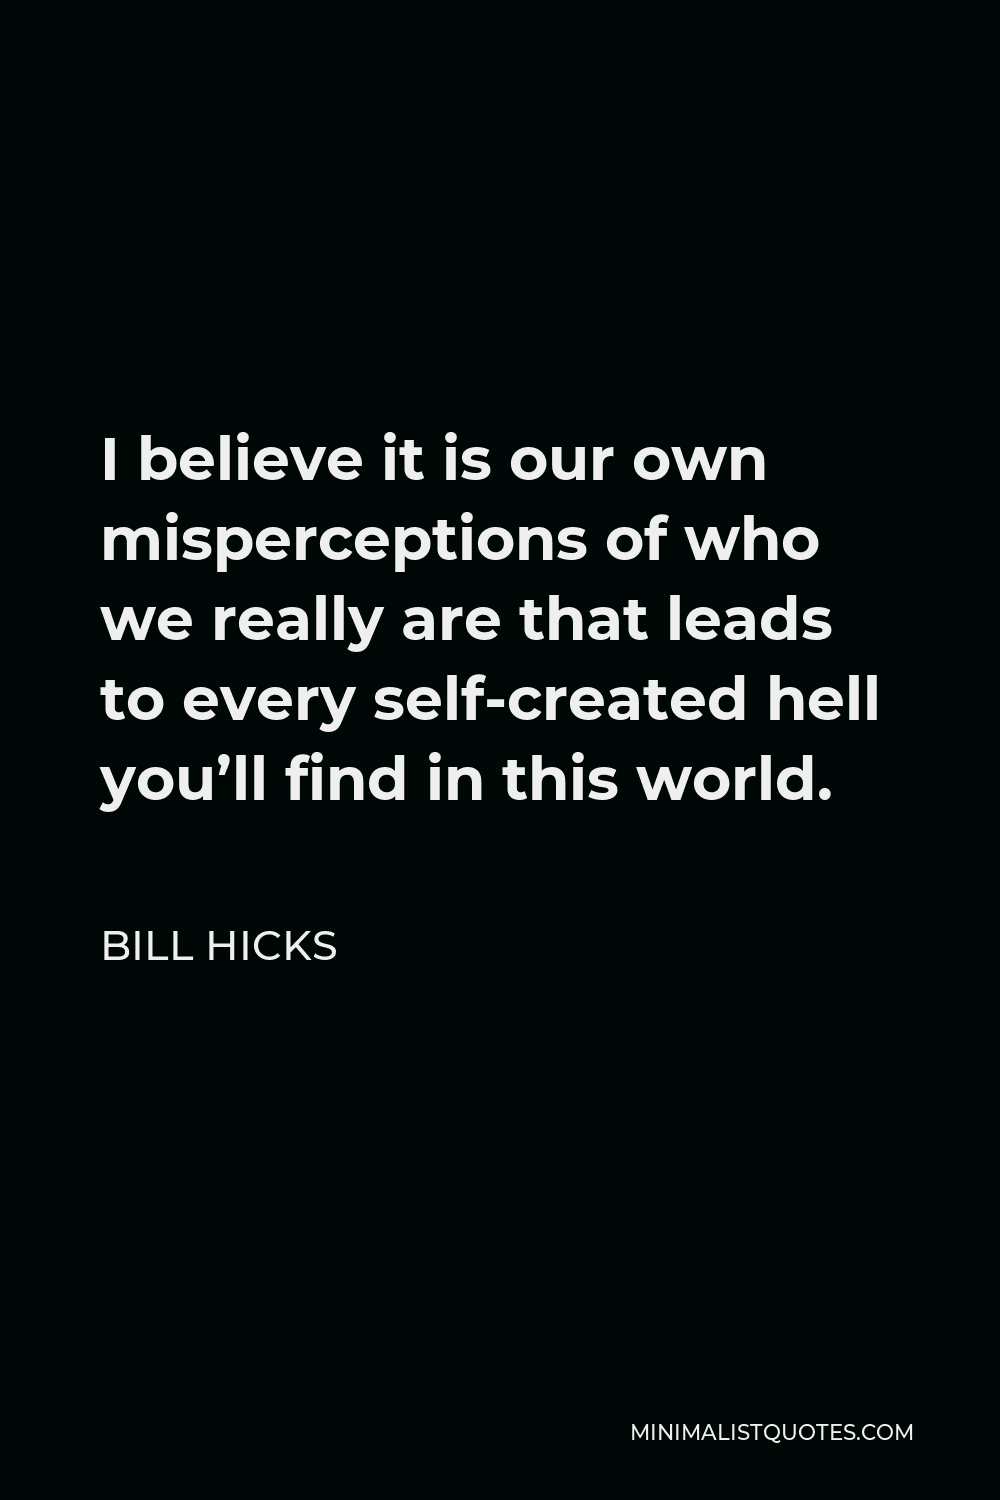 Bill Hicks Quote - I believe it is our own misperceptions of who we really are that leads to every self-created hell you’ll find in this world.